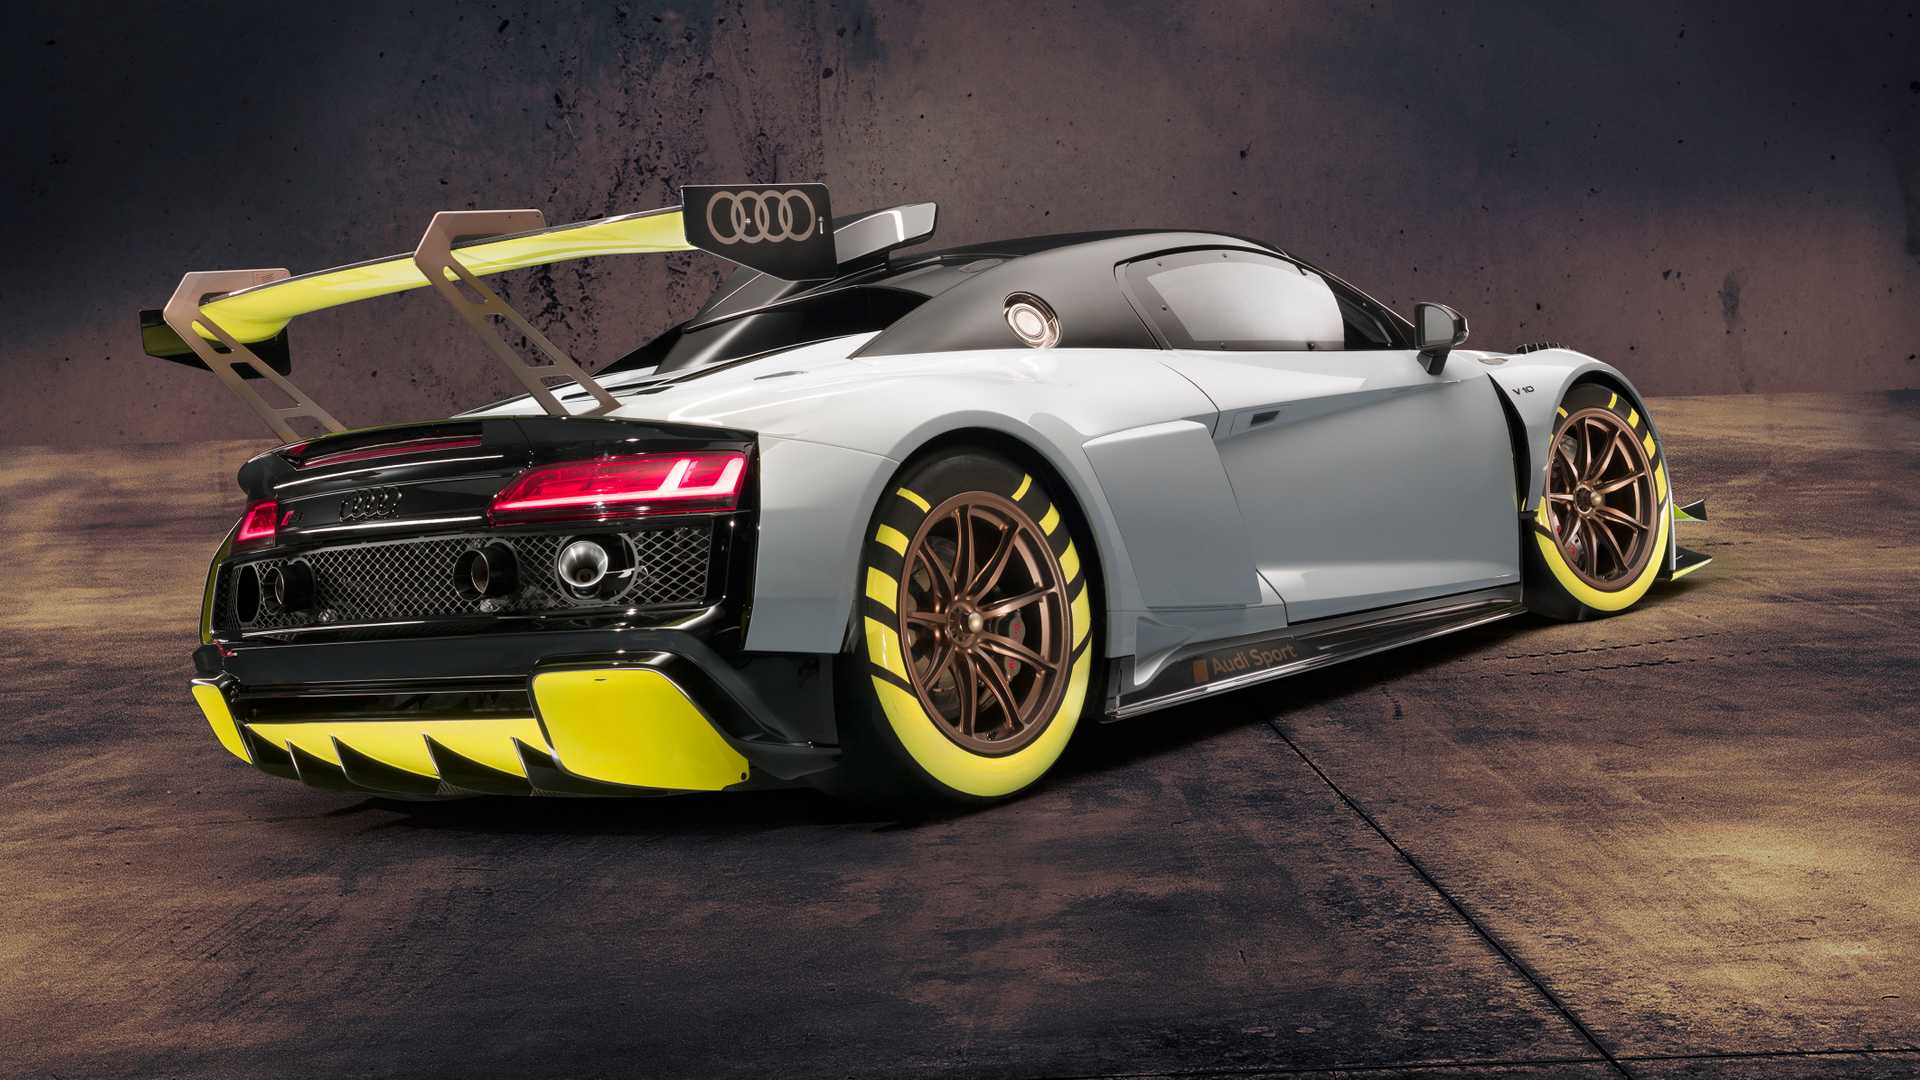 Audi R8 LMS GT2 Is A Wild Race Car With 630 HP [UPDATE]